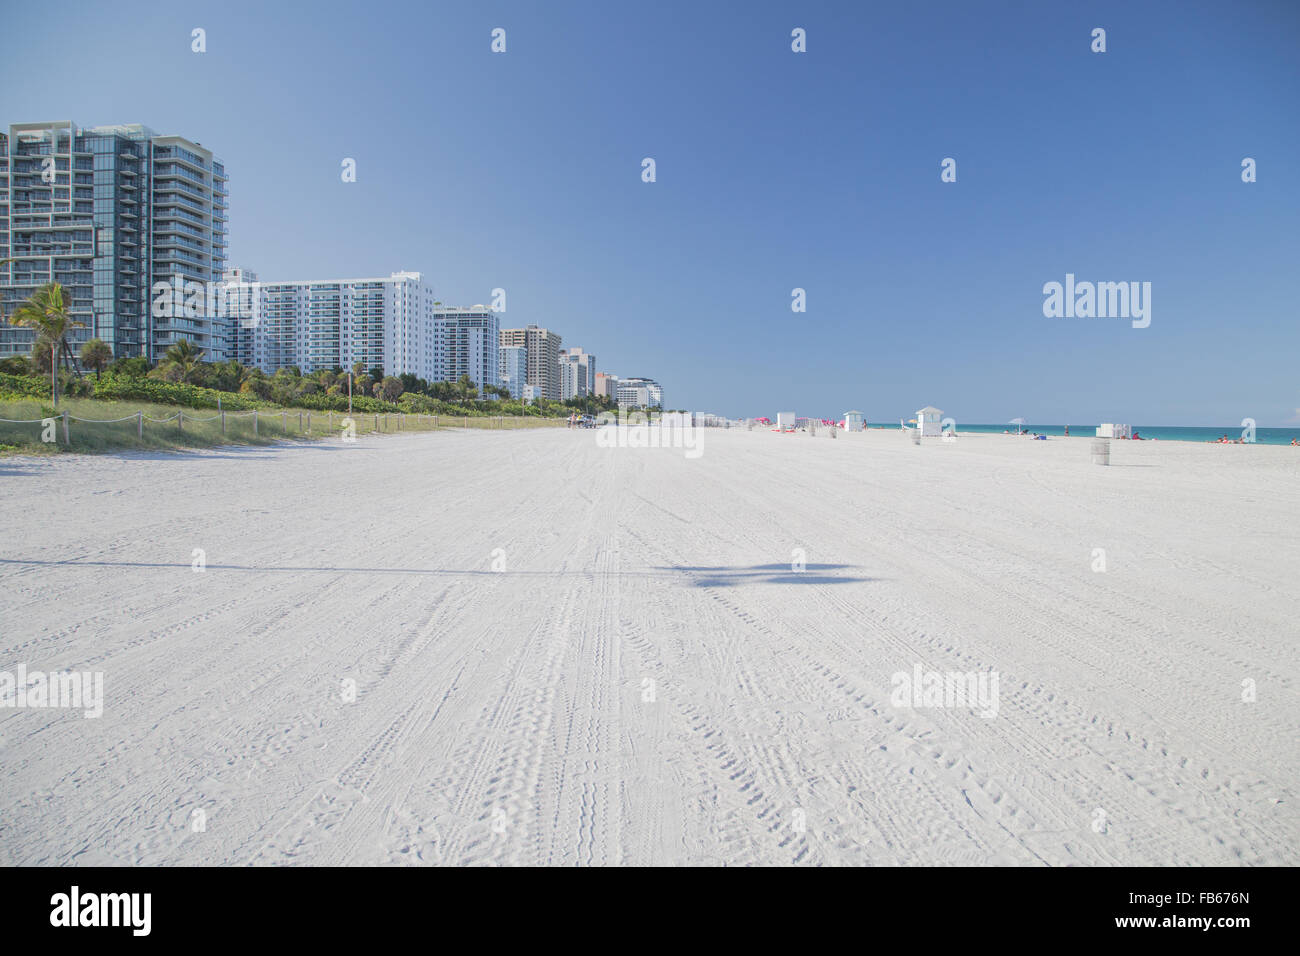 Inprinted vehicle tires spread over the white sandy beach accompanied by a silhouette of a palm tree in South Beach area of Miami Beach, Florida. Stock Photo